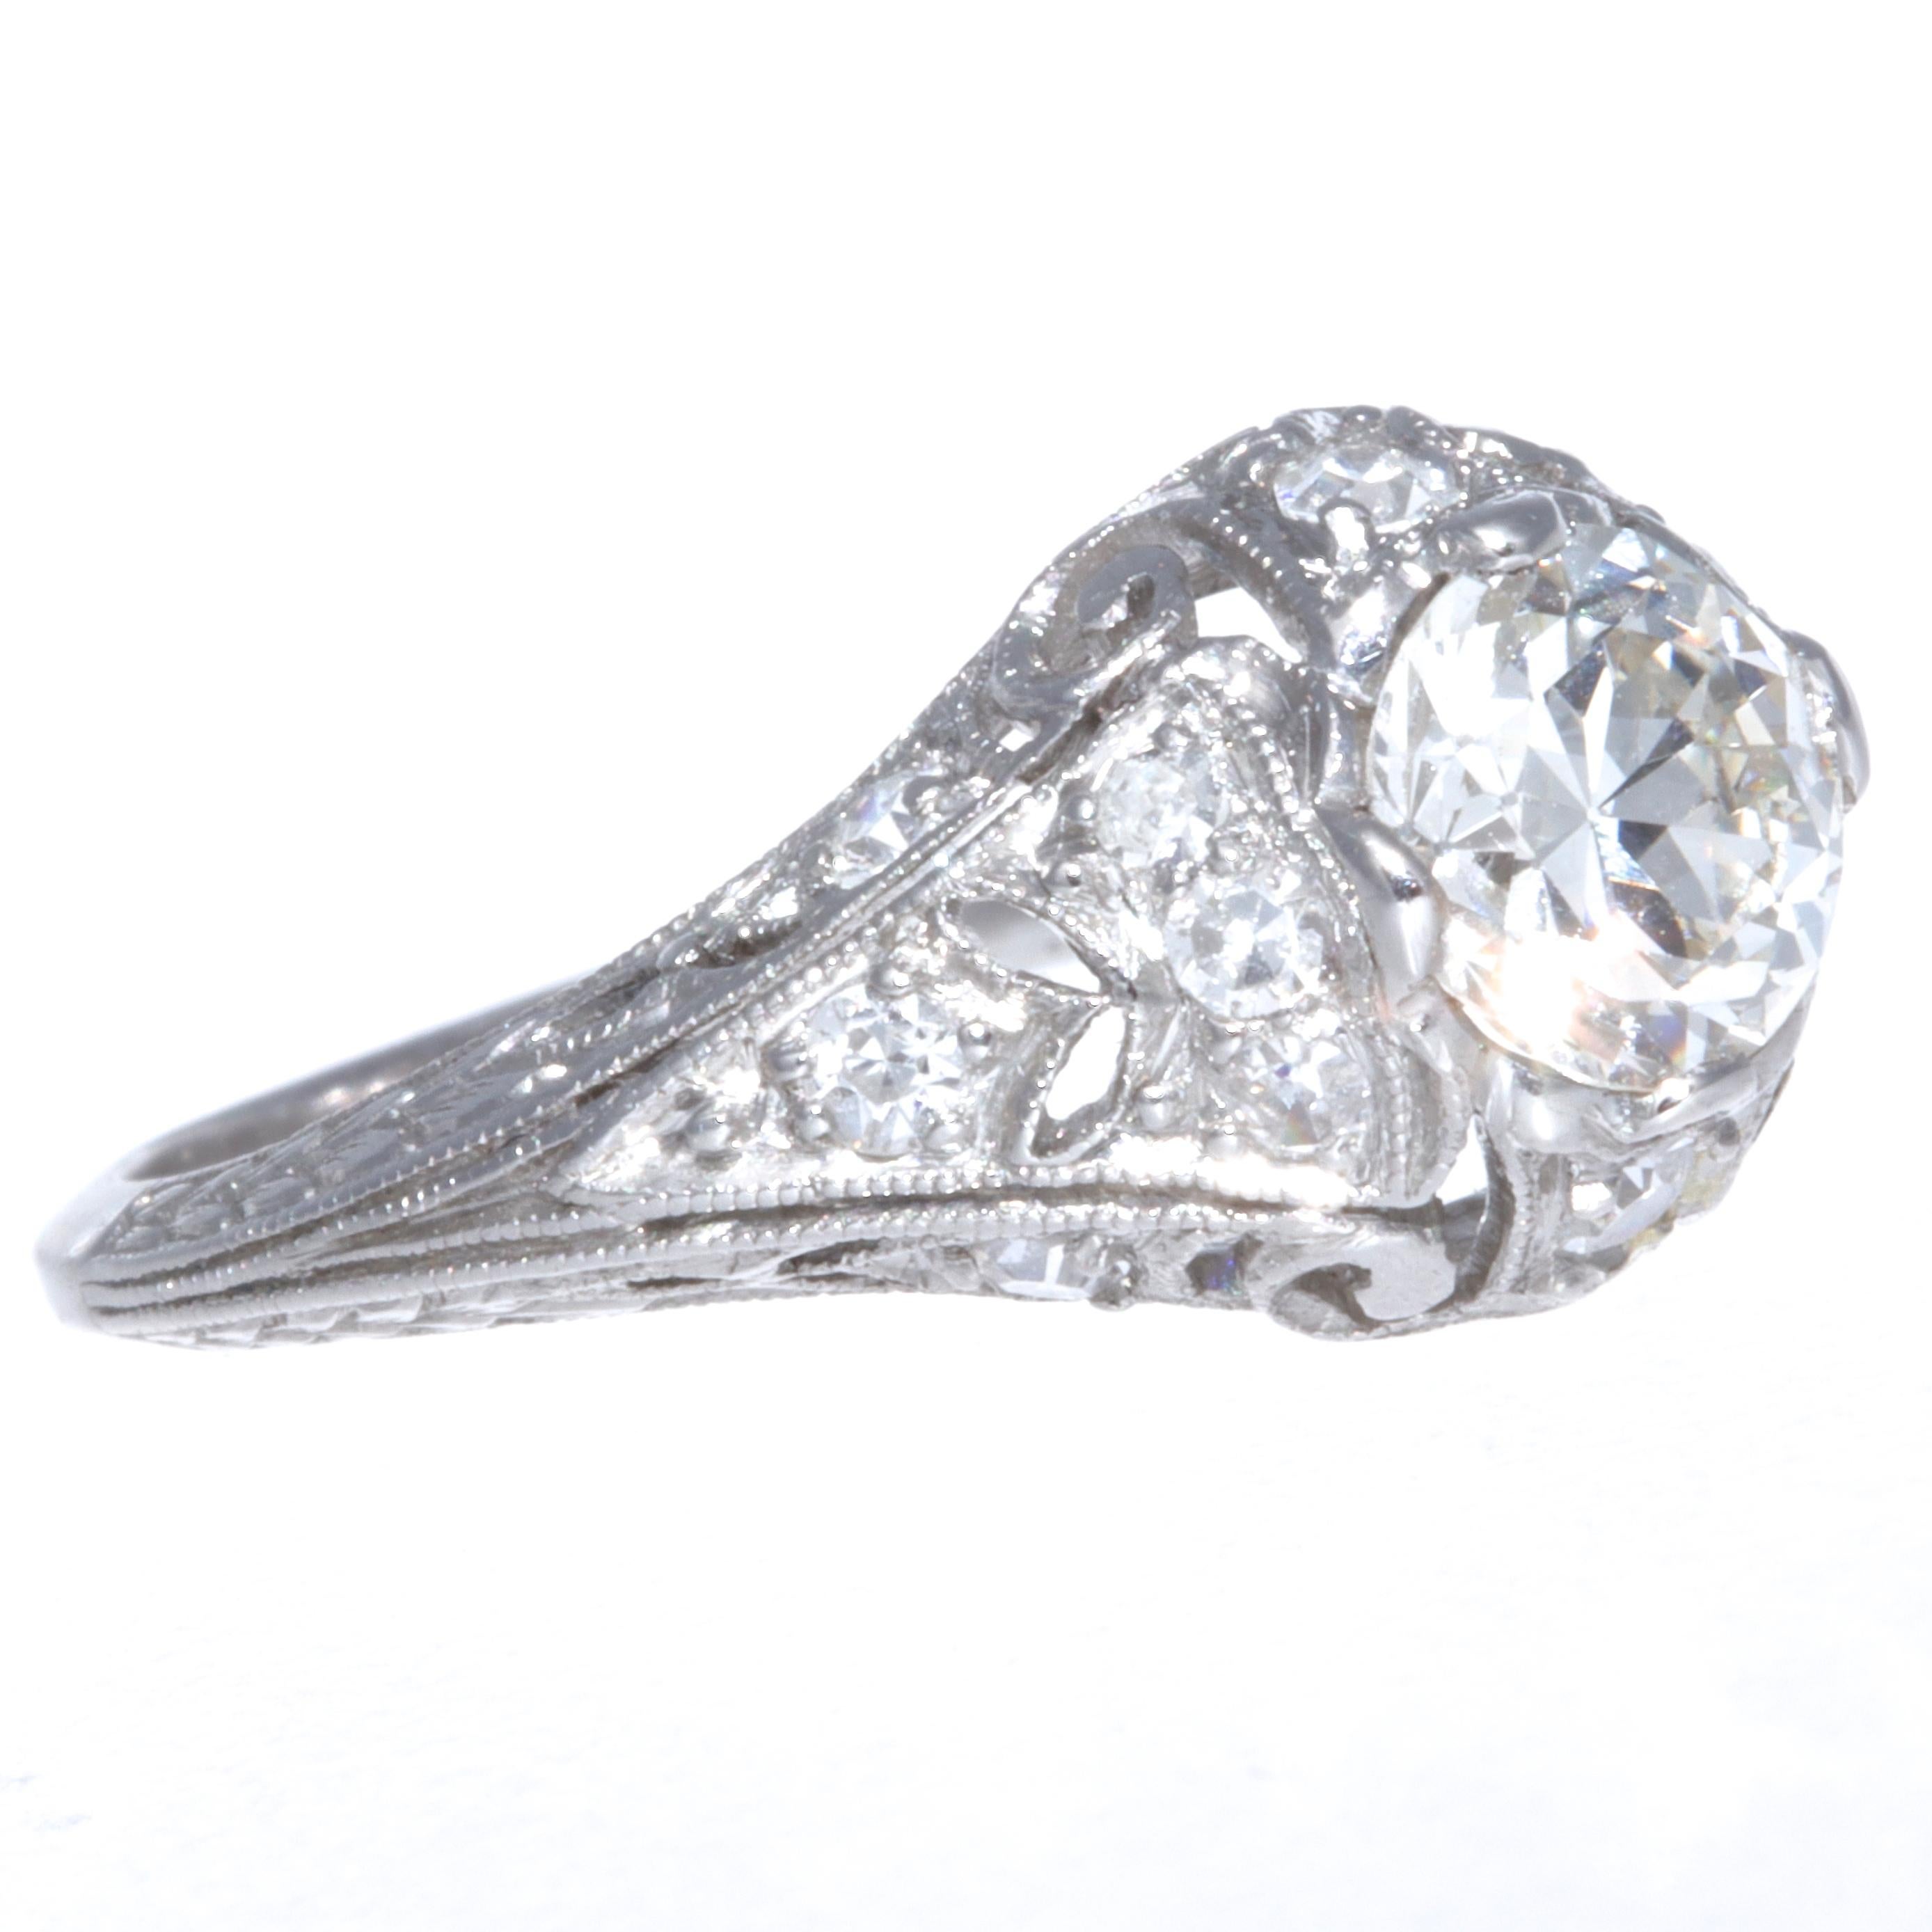 All stylistic elements of a true Art Deco period are included in this stunning Art Deco diamond platinum filigree engagement ring. So dreamy and jazzy, this ring features a GIA certified Old European Cut 0.74 carat K color VS2 clarity. Fifteen